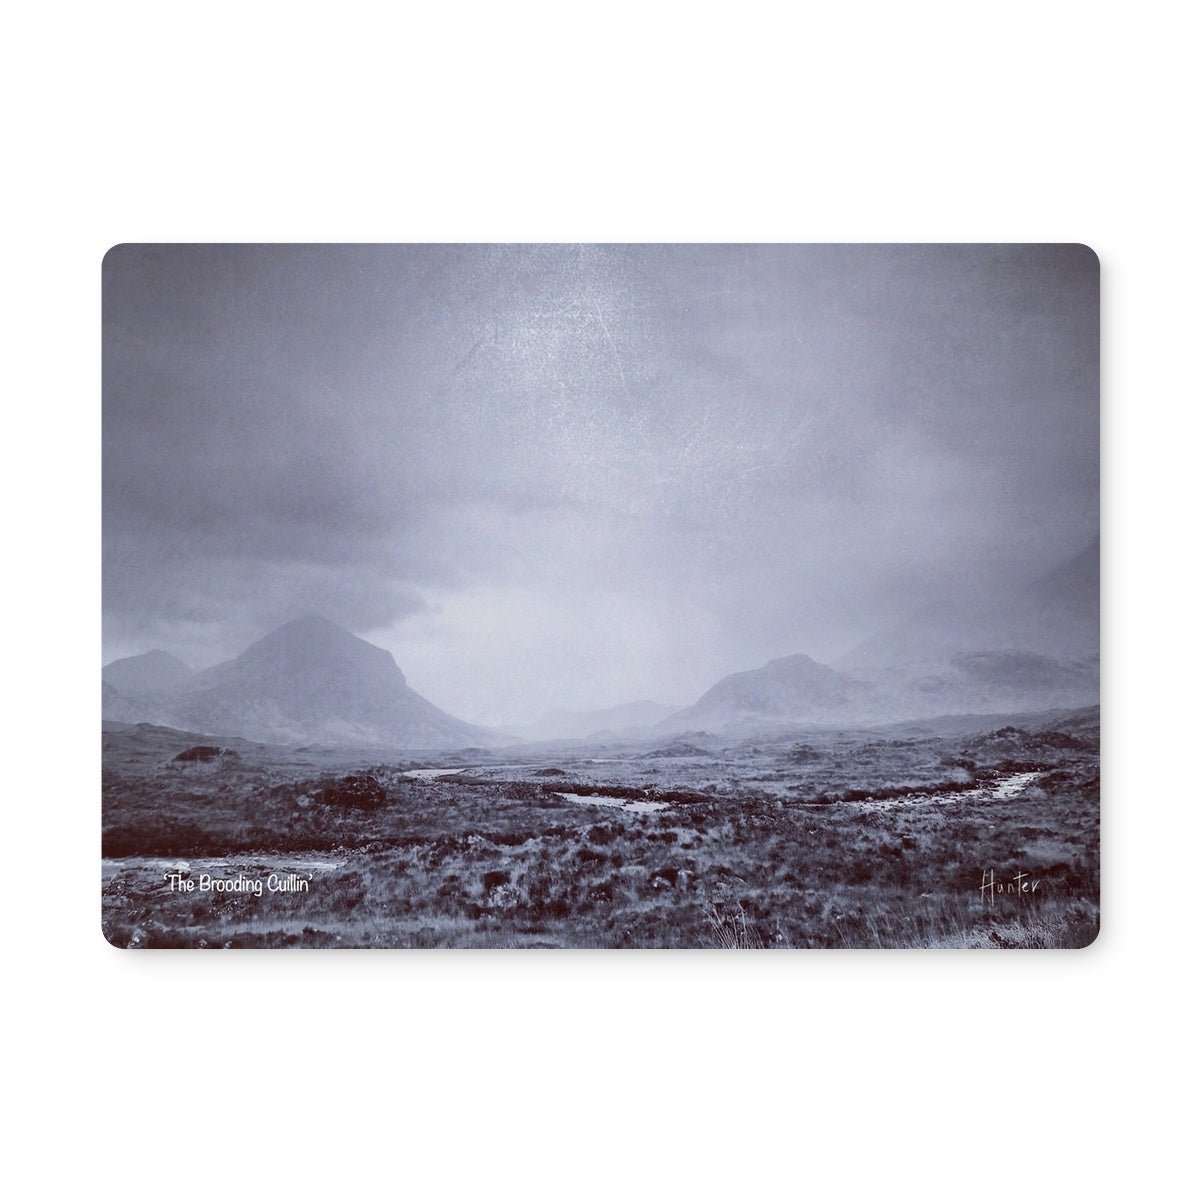 The Brooding Cuillin Skye Art Gifts Placemat-Placemats-Skye Art Gallery-4 Placemats-Paintings, Prints, Homeware, Art Gifts From Scotland By Scottish Artist Kevin Hunter